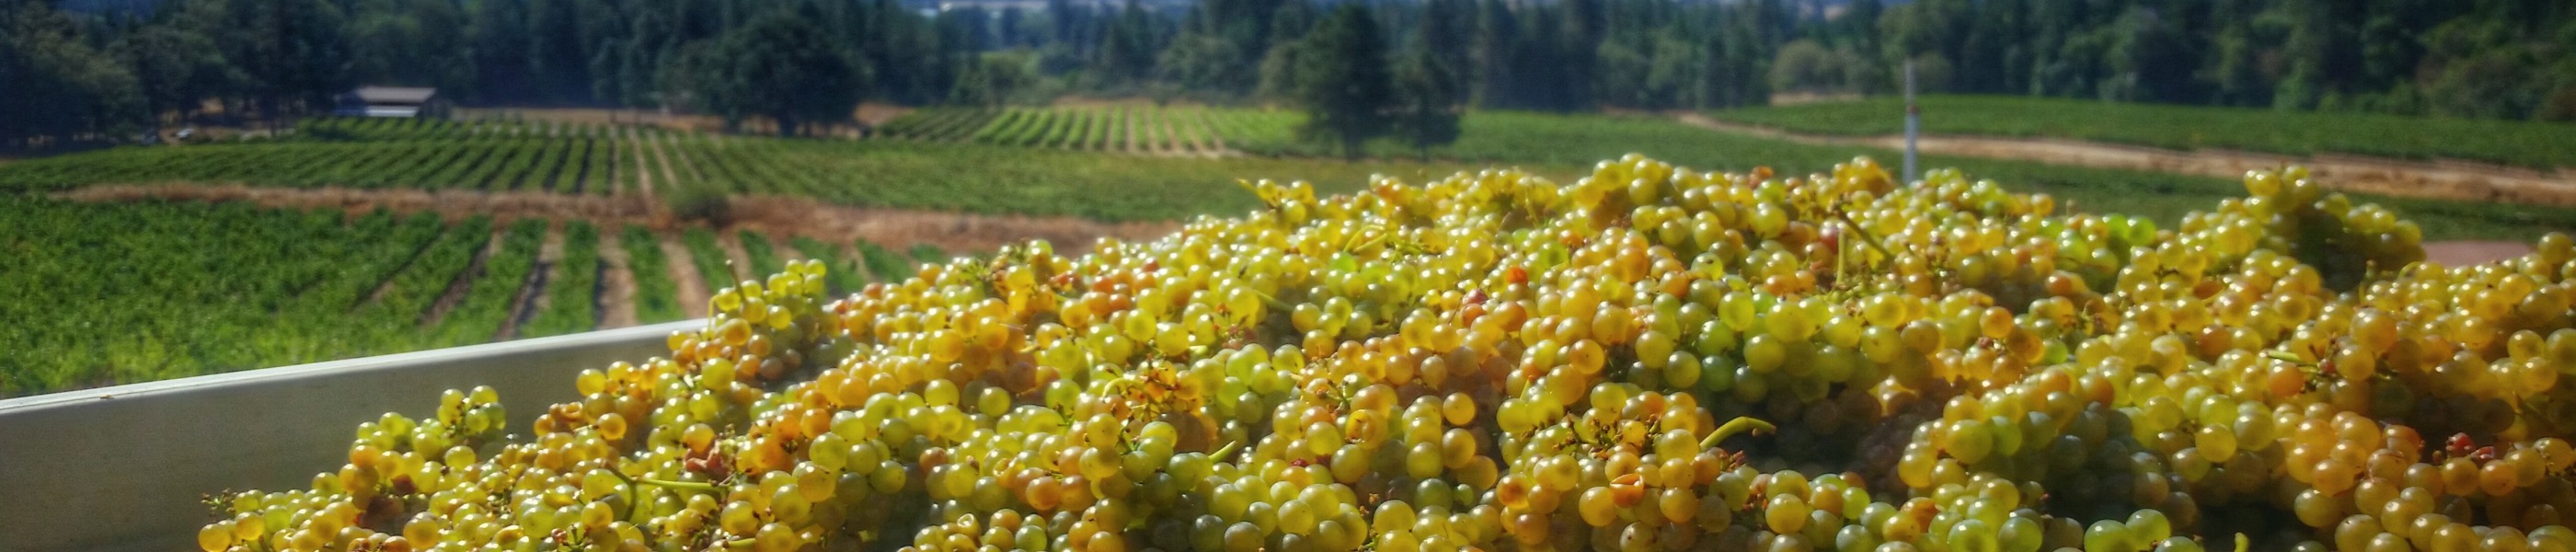 Freshly harvested grapes waiting to be turned into delicious wines